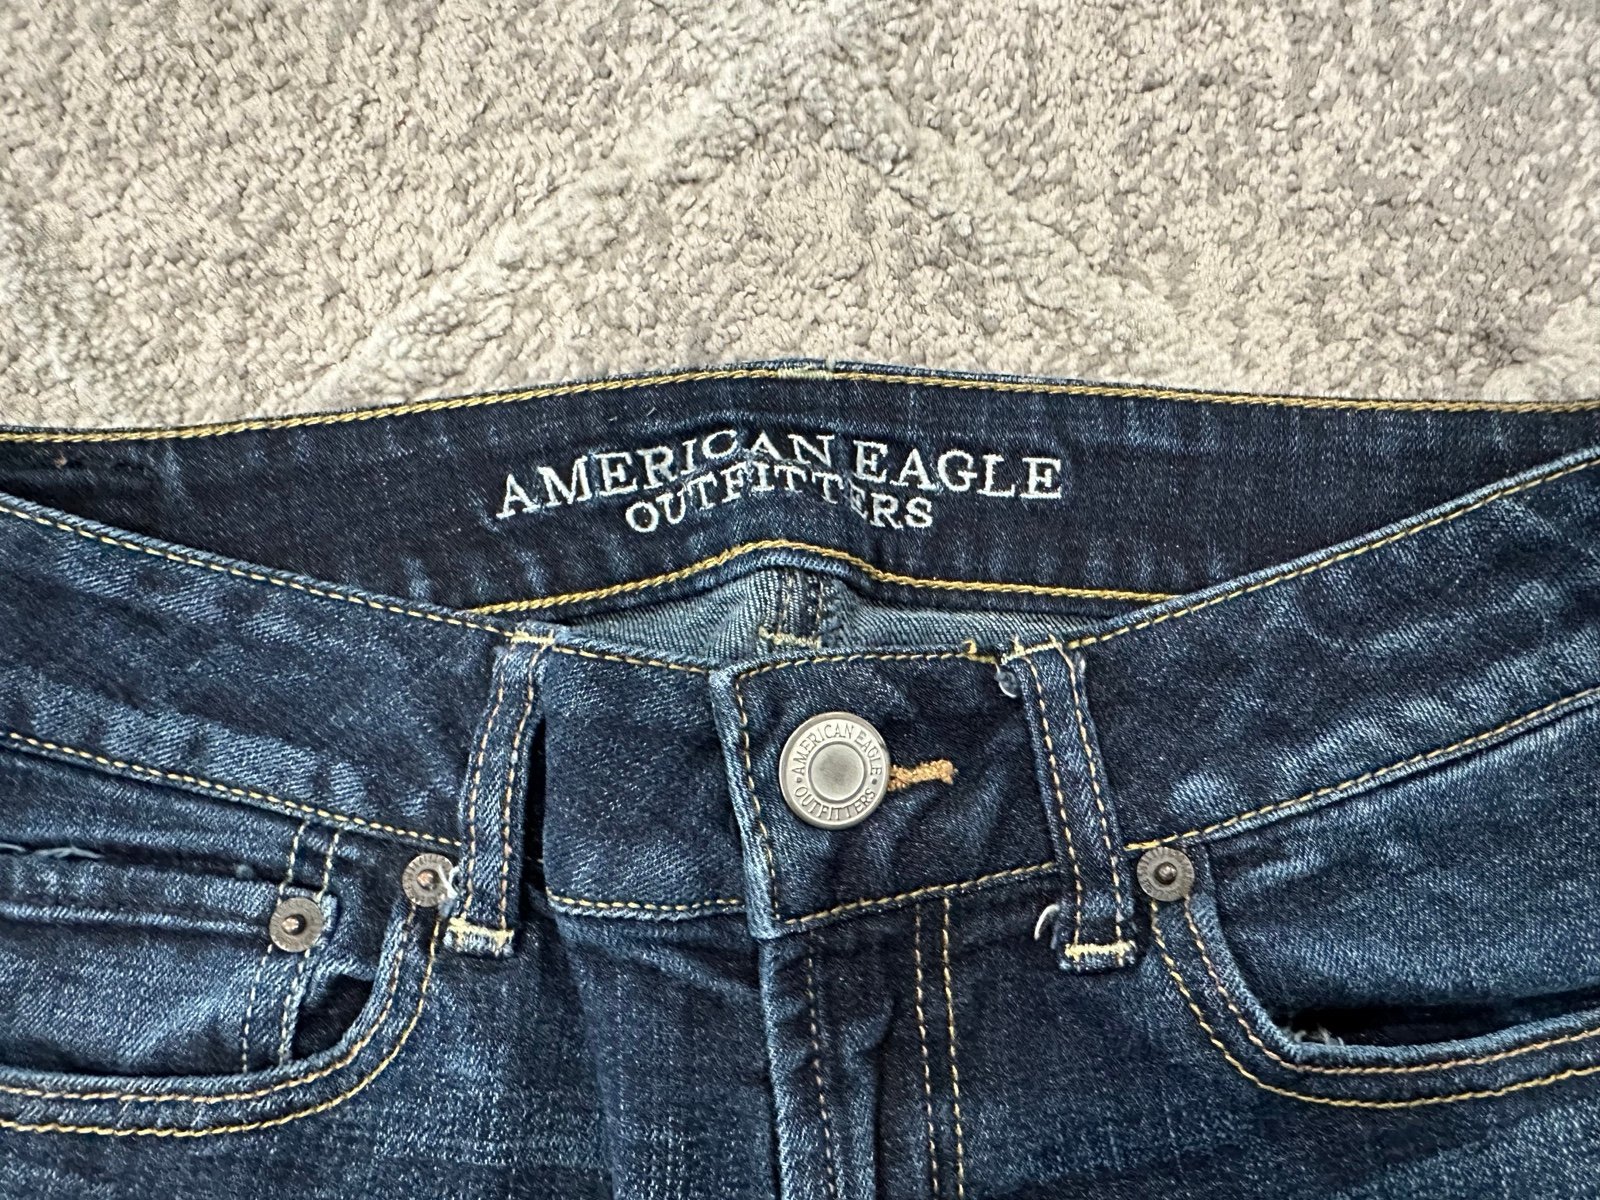 Wholesale price AMERICAN EAGLE AE - Low-Rise Favorite Boyfriends Jeans Size 4 nULQYKGAa well sale